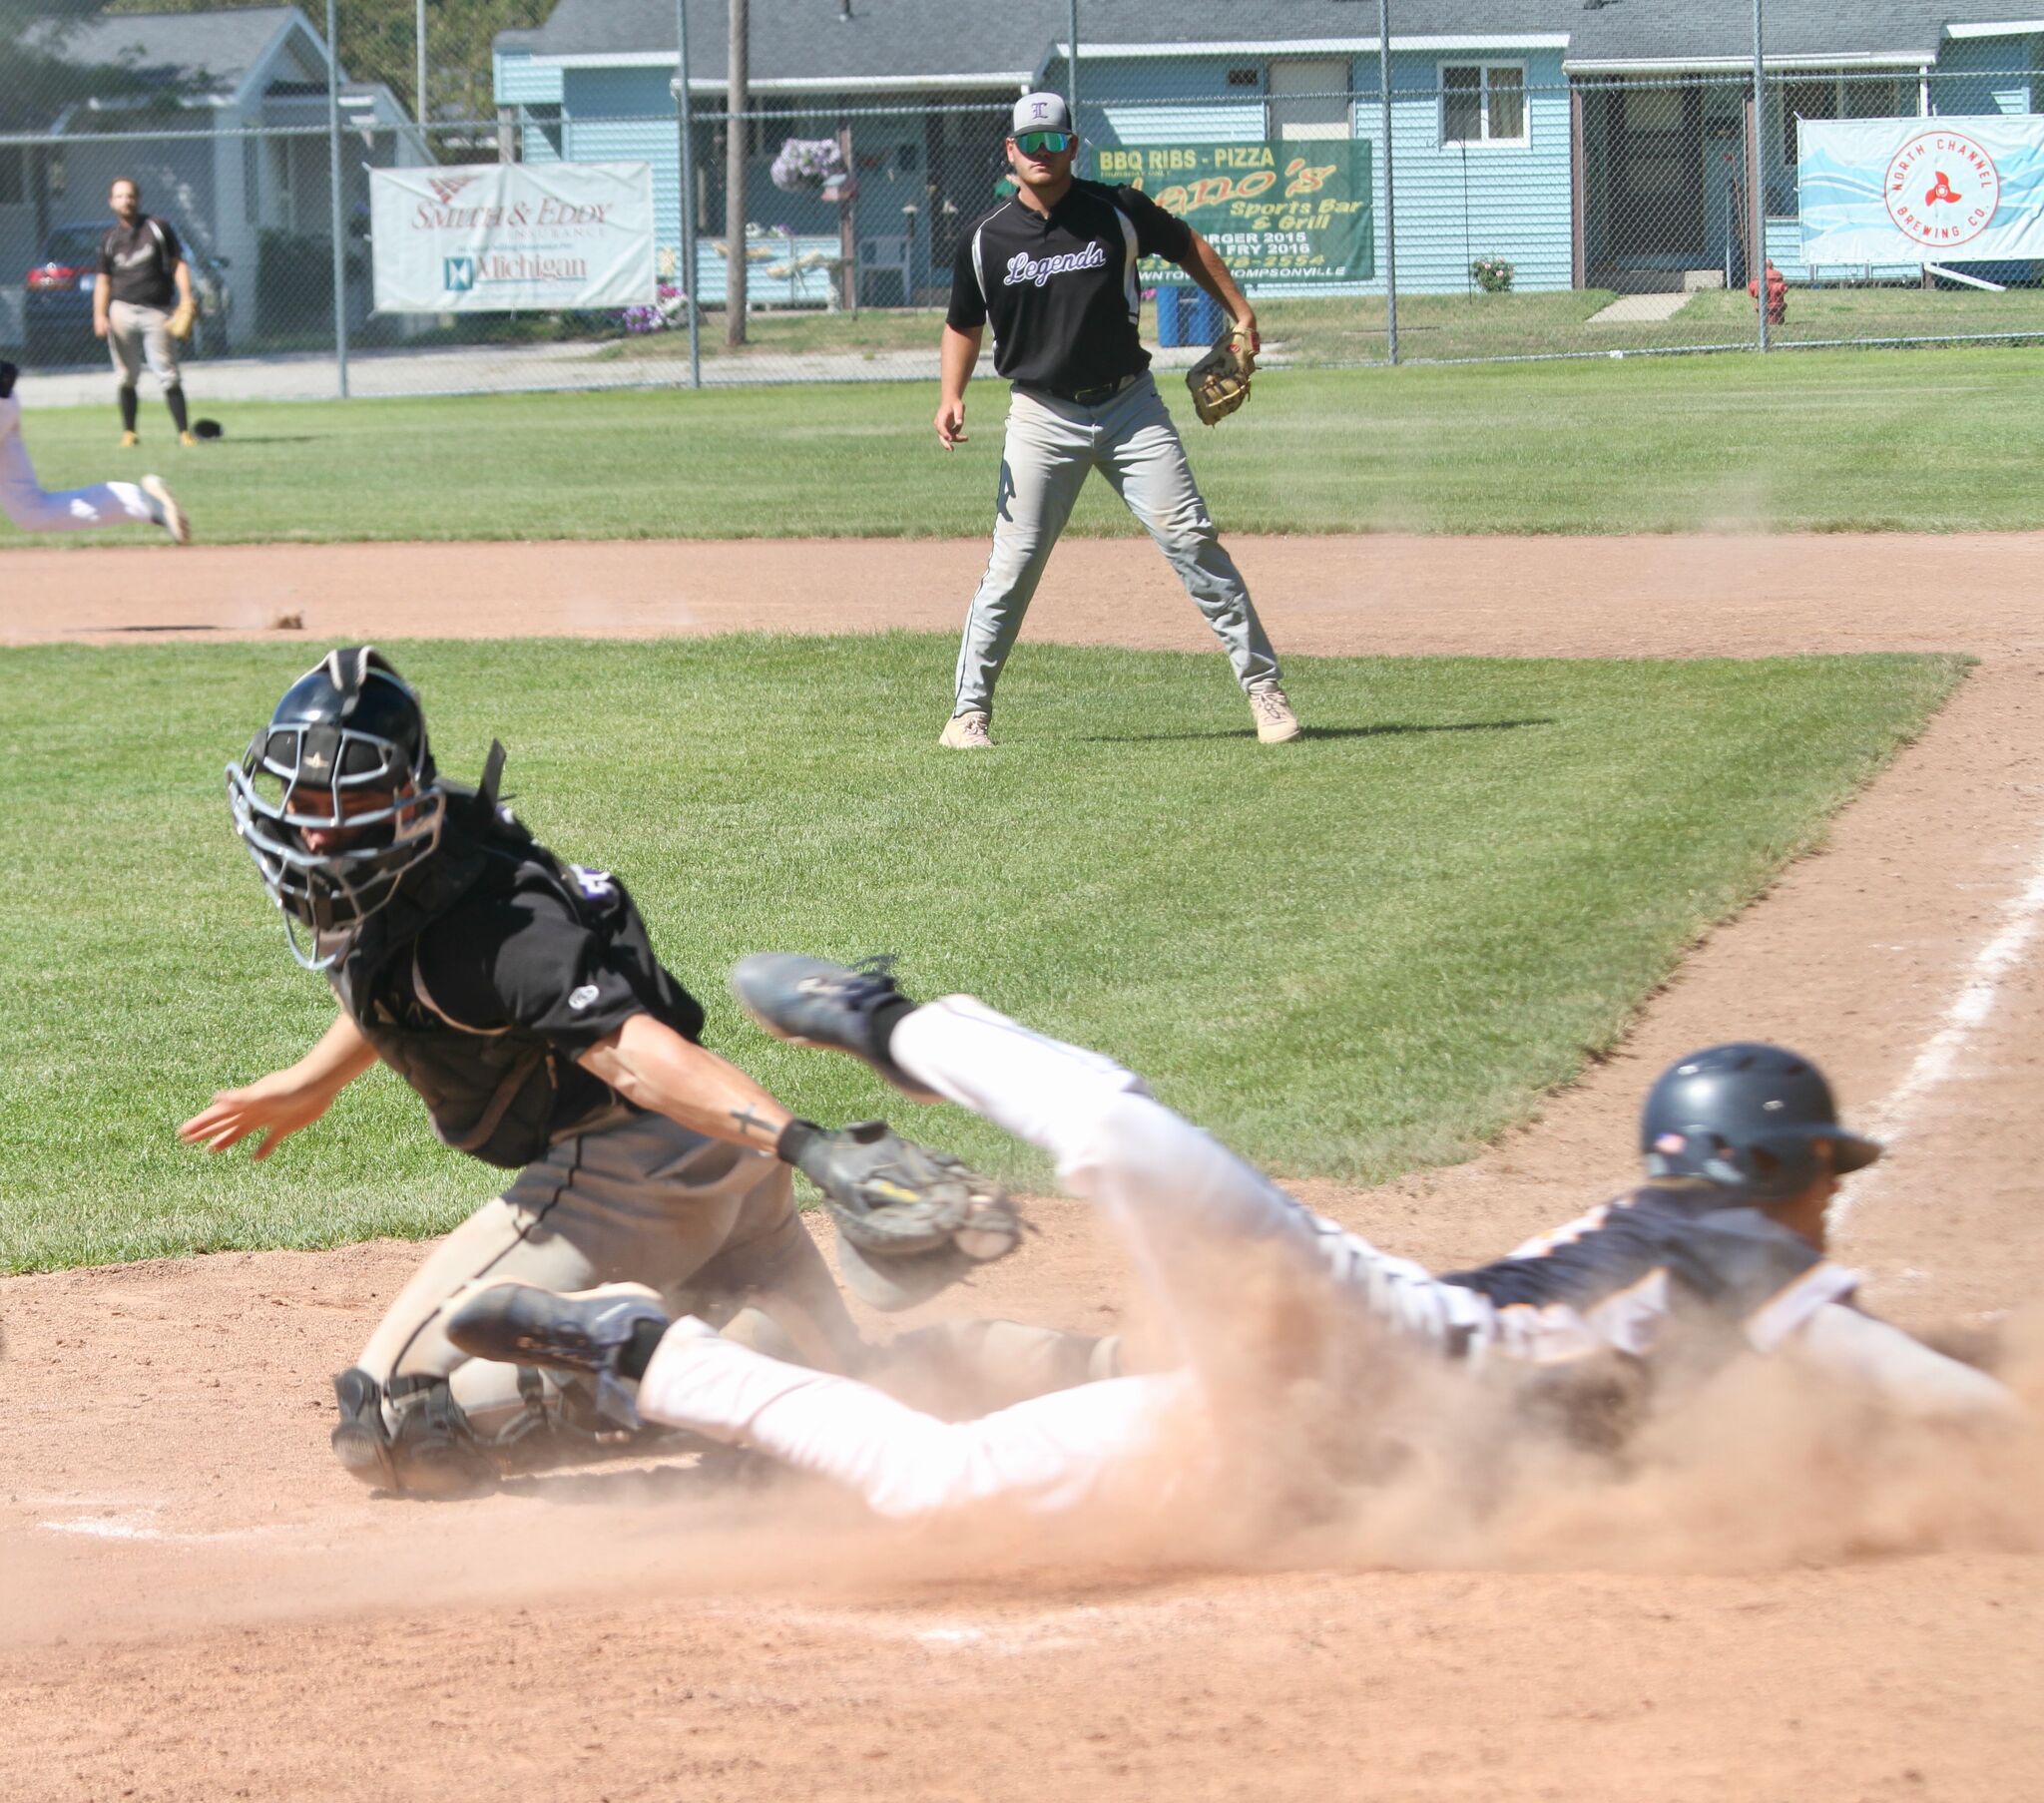 Manistee Saints starts NABF World Series with win over South Bend